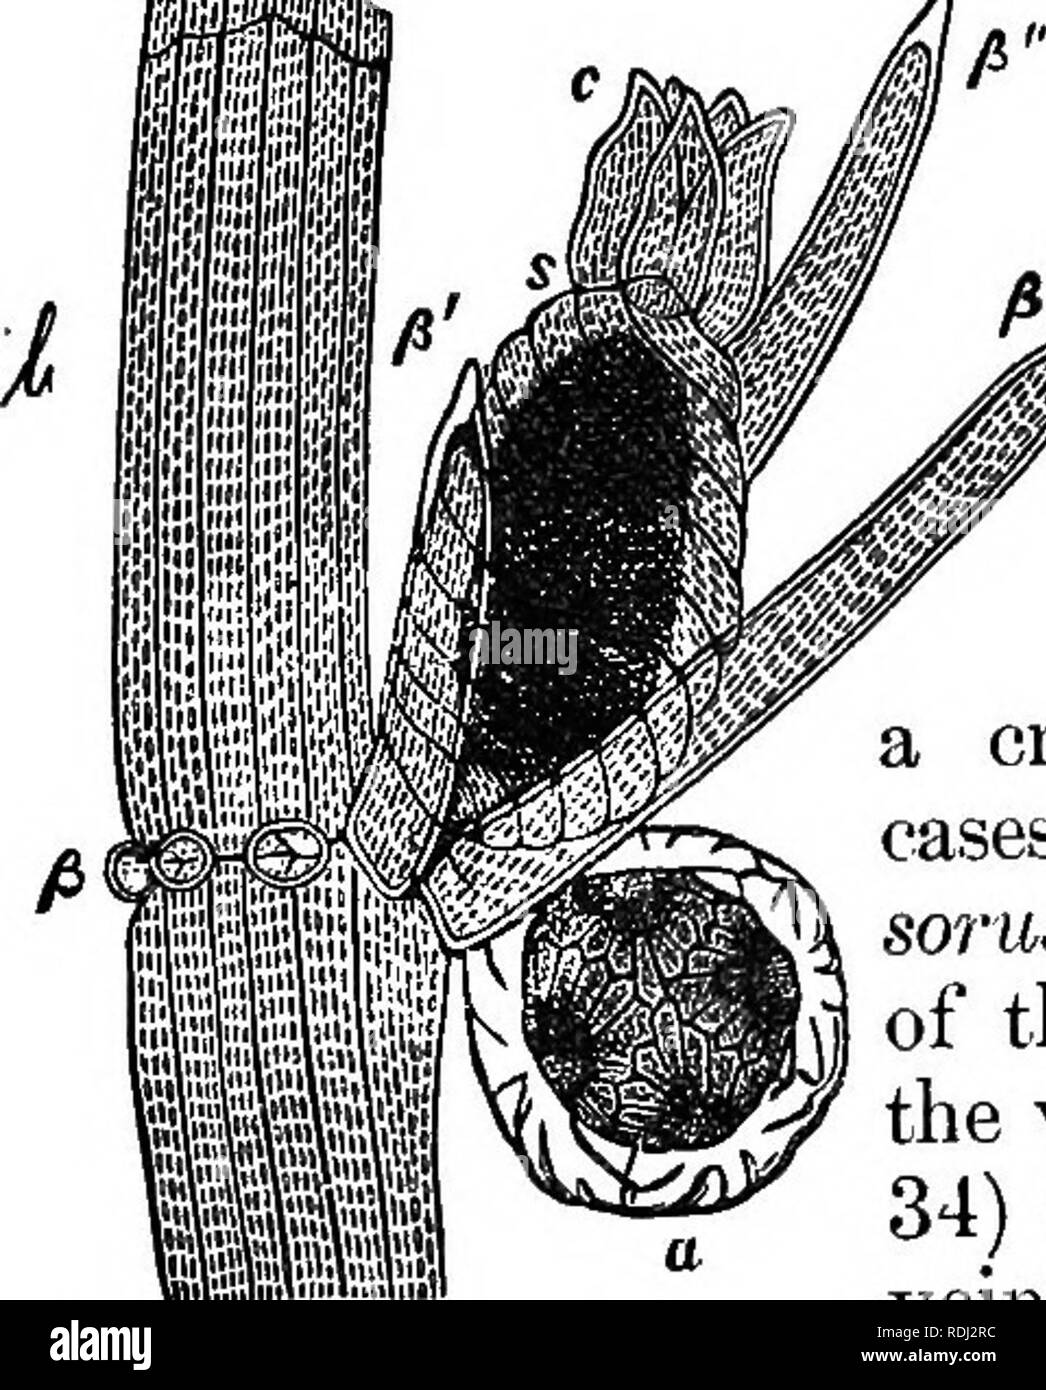 . Botany for academies and colleges: consisting of plant development and structure from seaweed to clematis. Botany; 1889. 36 ACADEMIC BOTANY.. 63. The Ferns have leaf- like fronds -which bear the spores, though the spore-bear- ing fronds are often trans- 7 formed, as in the Osmunda (Fig. 33). The fronds are forJe-vdned (Fig. 33, a) and cirdnate in bud,—rolled like isier (Fig. 34). The spore- cases are in groups called Sori (L. so7'us, a heap), on the under surface of the frond; either at the end of the veins and near the margin (Fig. 34) or variously arranged along the veins (Figs. 33,35). Th Stock Photo